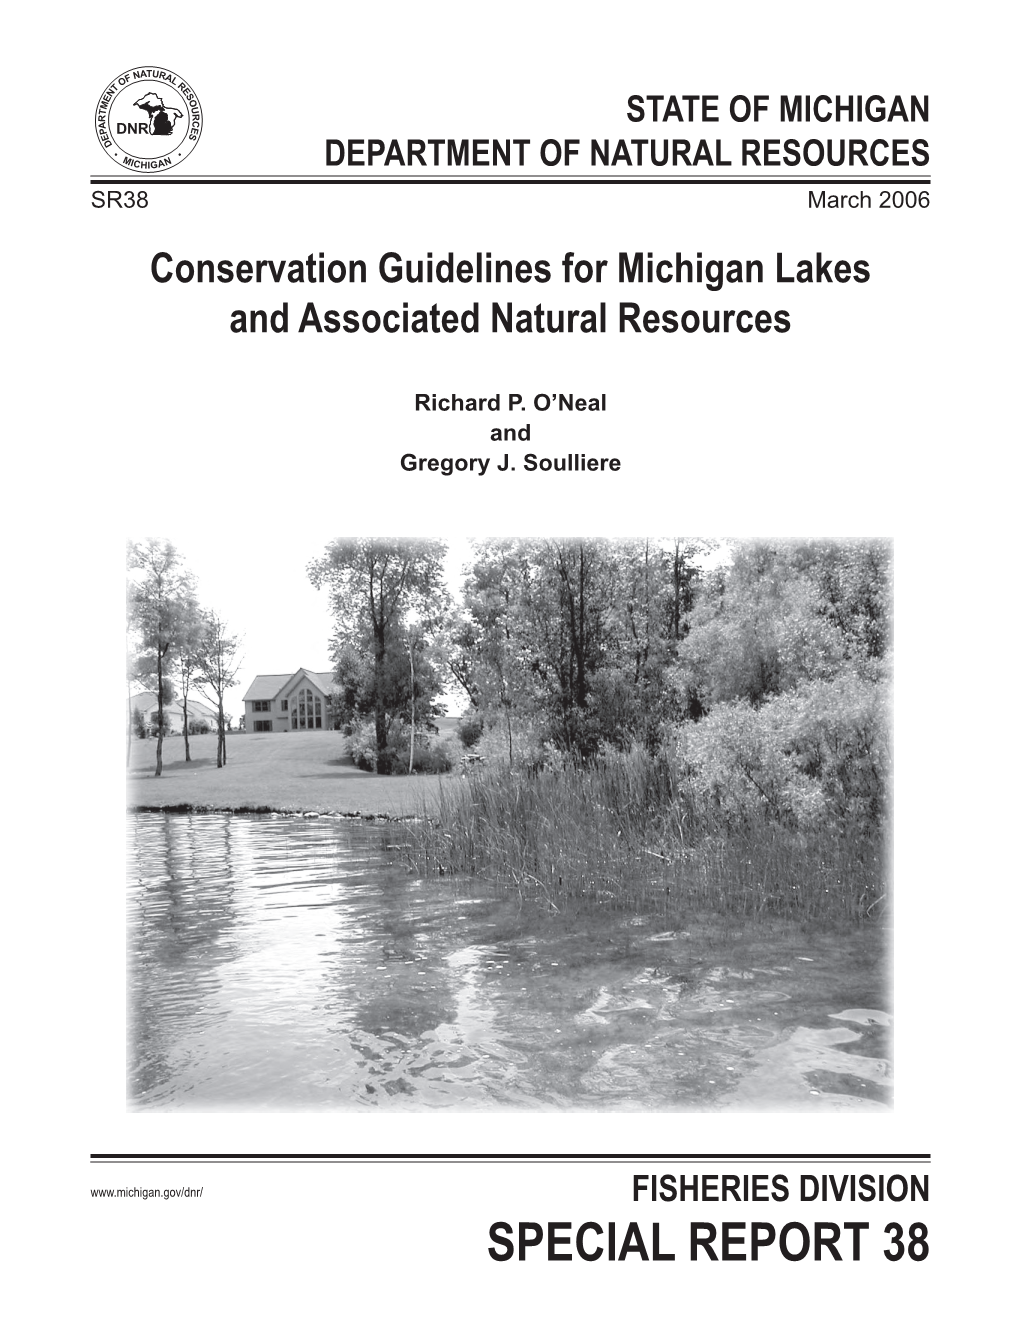 Conservation Guidelines for Michigan Lakes and Associated Natural Resources